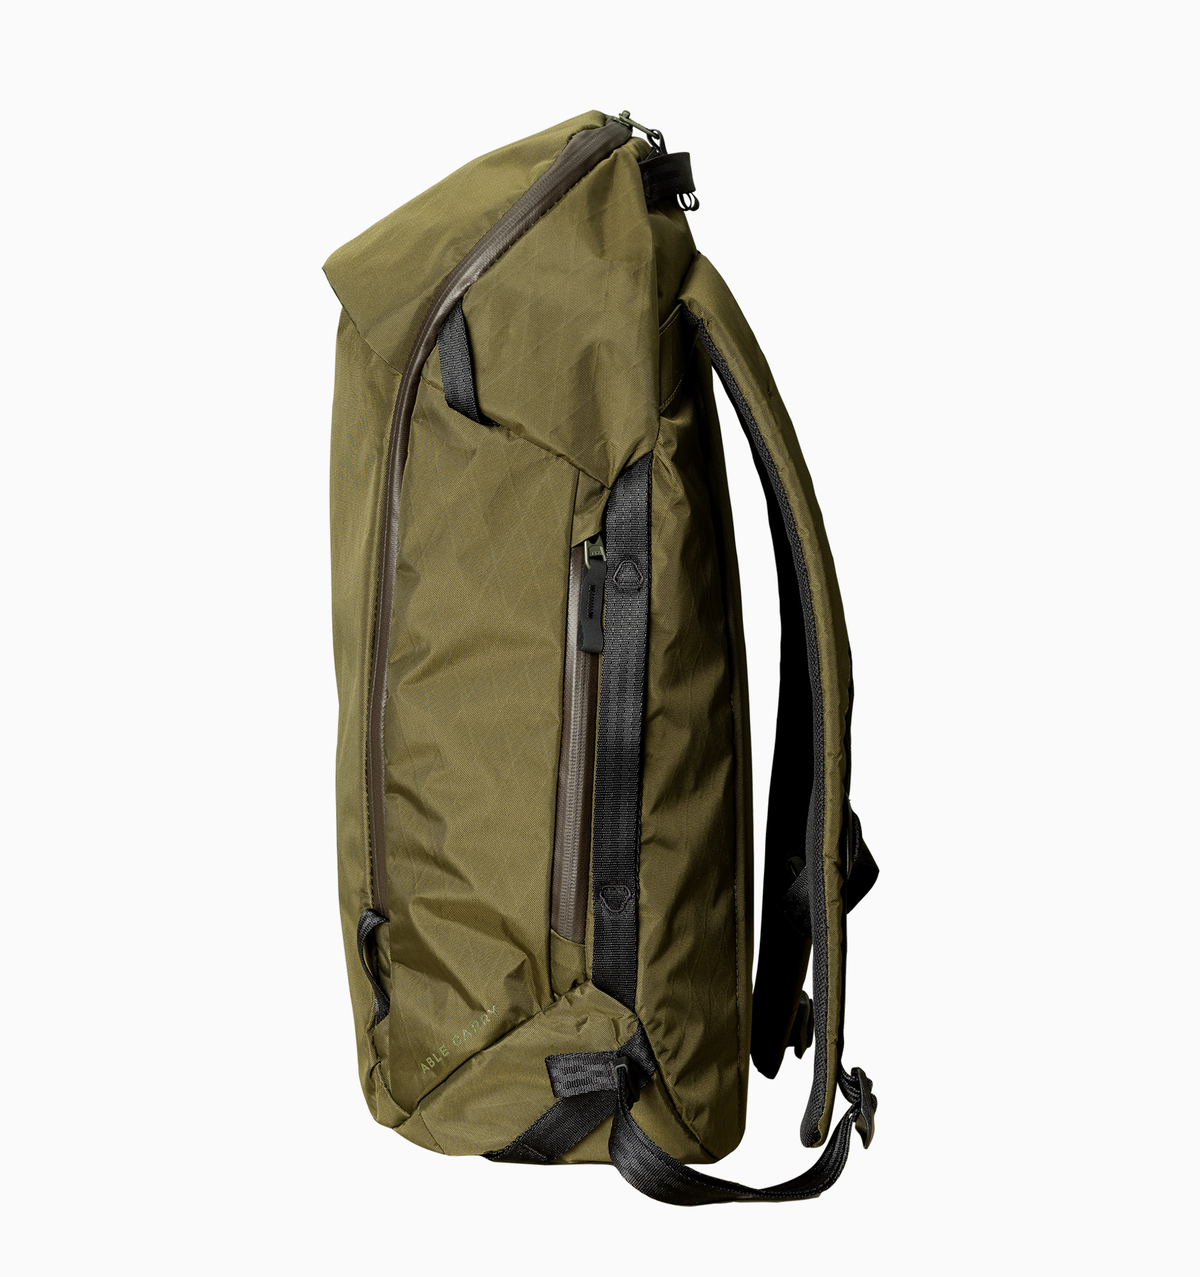 Able Carry 16" Daybreaker 2 X-Pac 25L - Olive Green